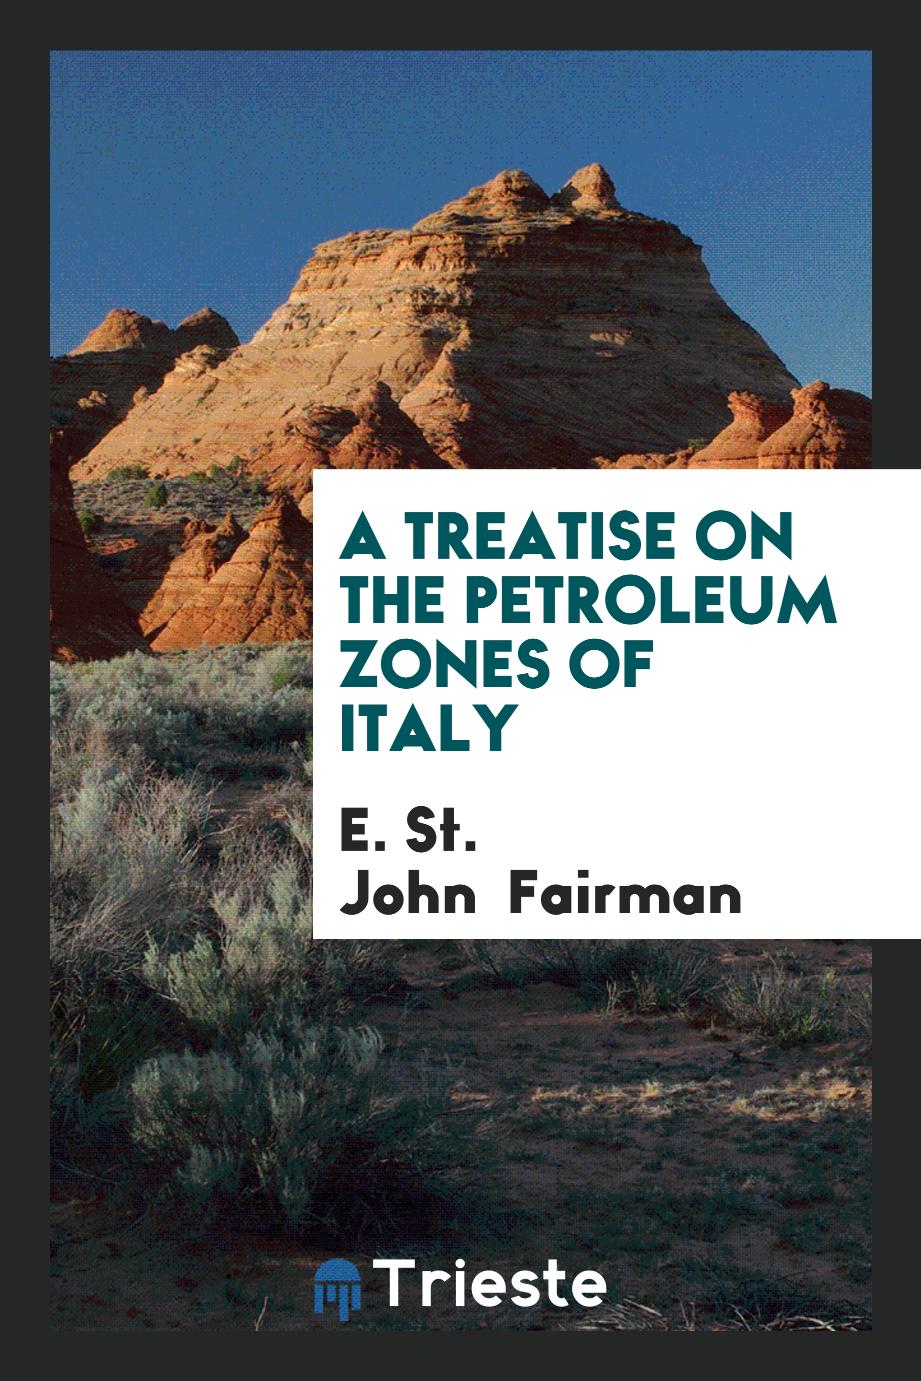 A treatise on the Petroleum Zones of Italy